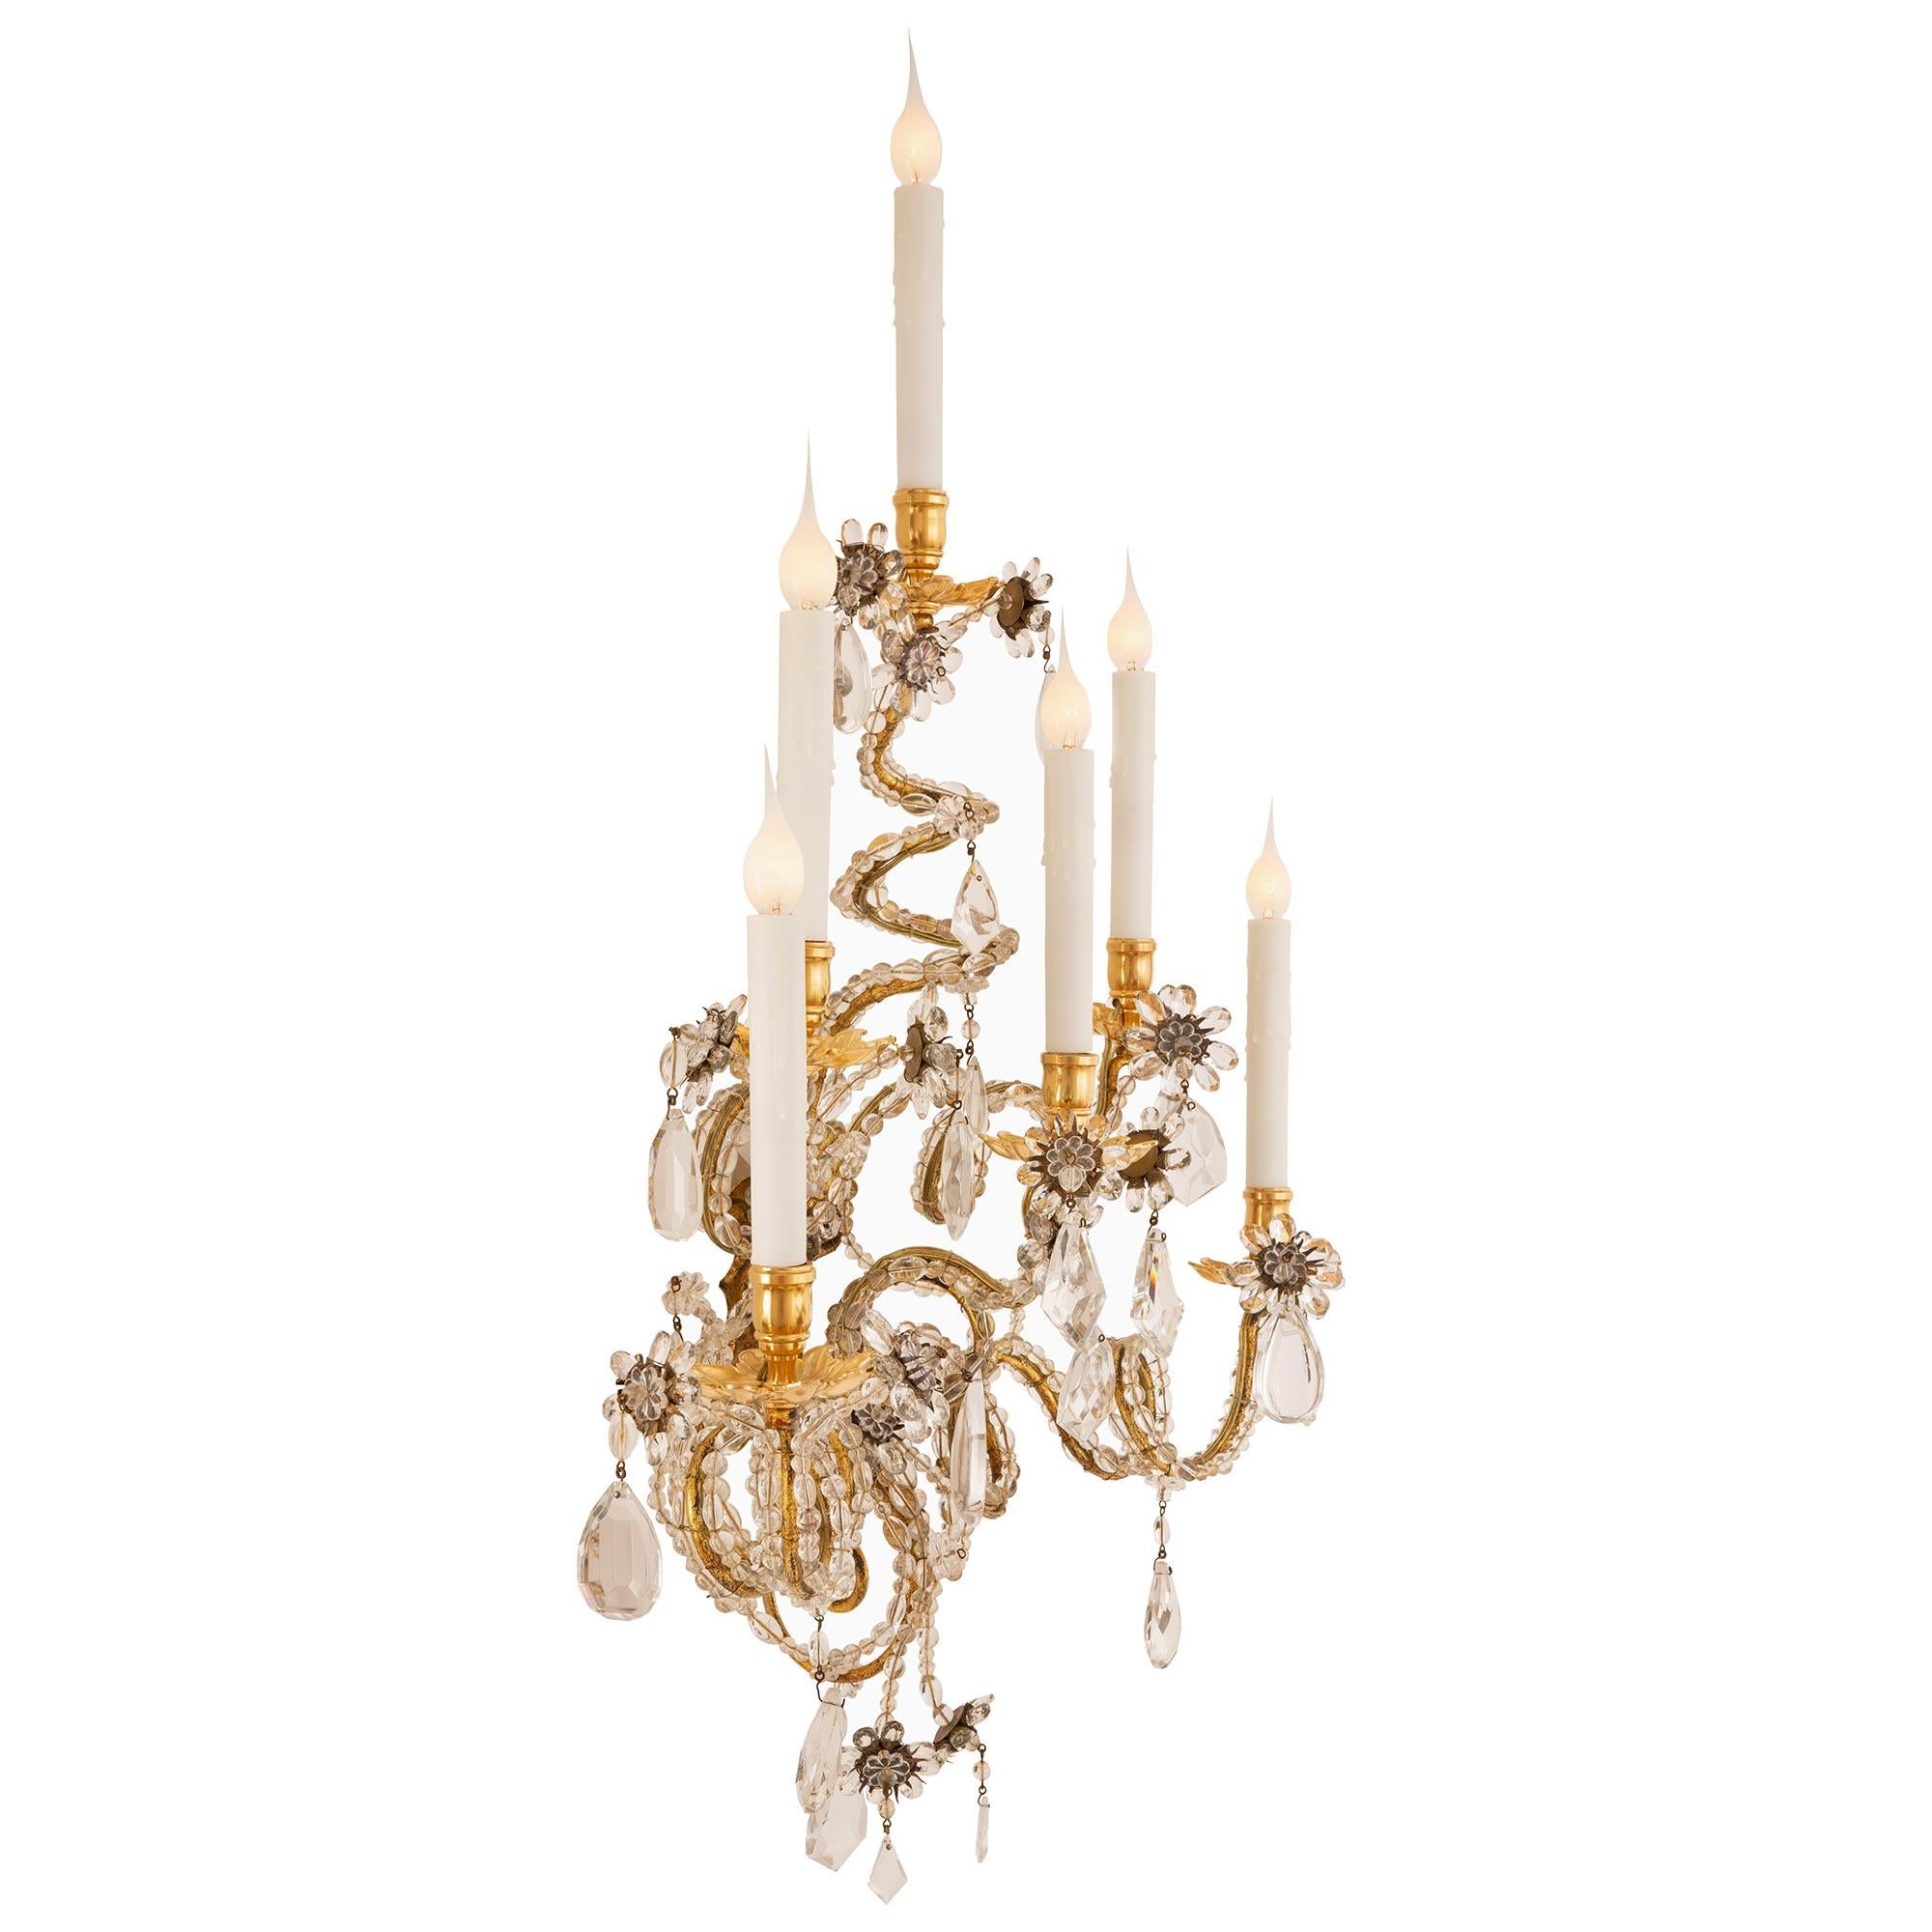 An outstanding and most decorative true pair of Italian turn-of-the-century gilt metal, ormolu, glass, and crystal sconces. Each six arm sconce is centered by a lovely charming crystal and beaded glass flower below the stunning scrolled twisted arms